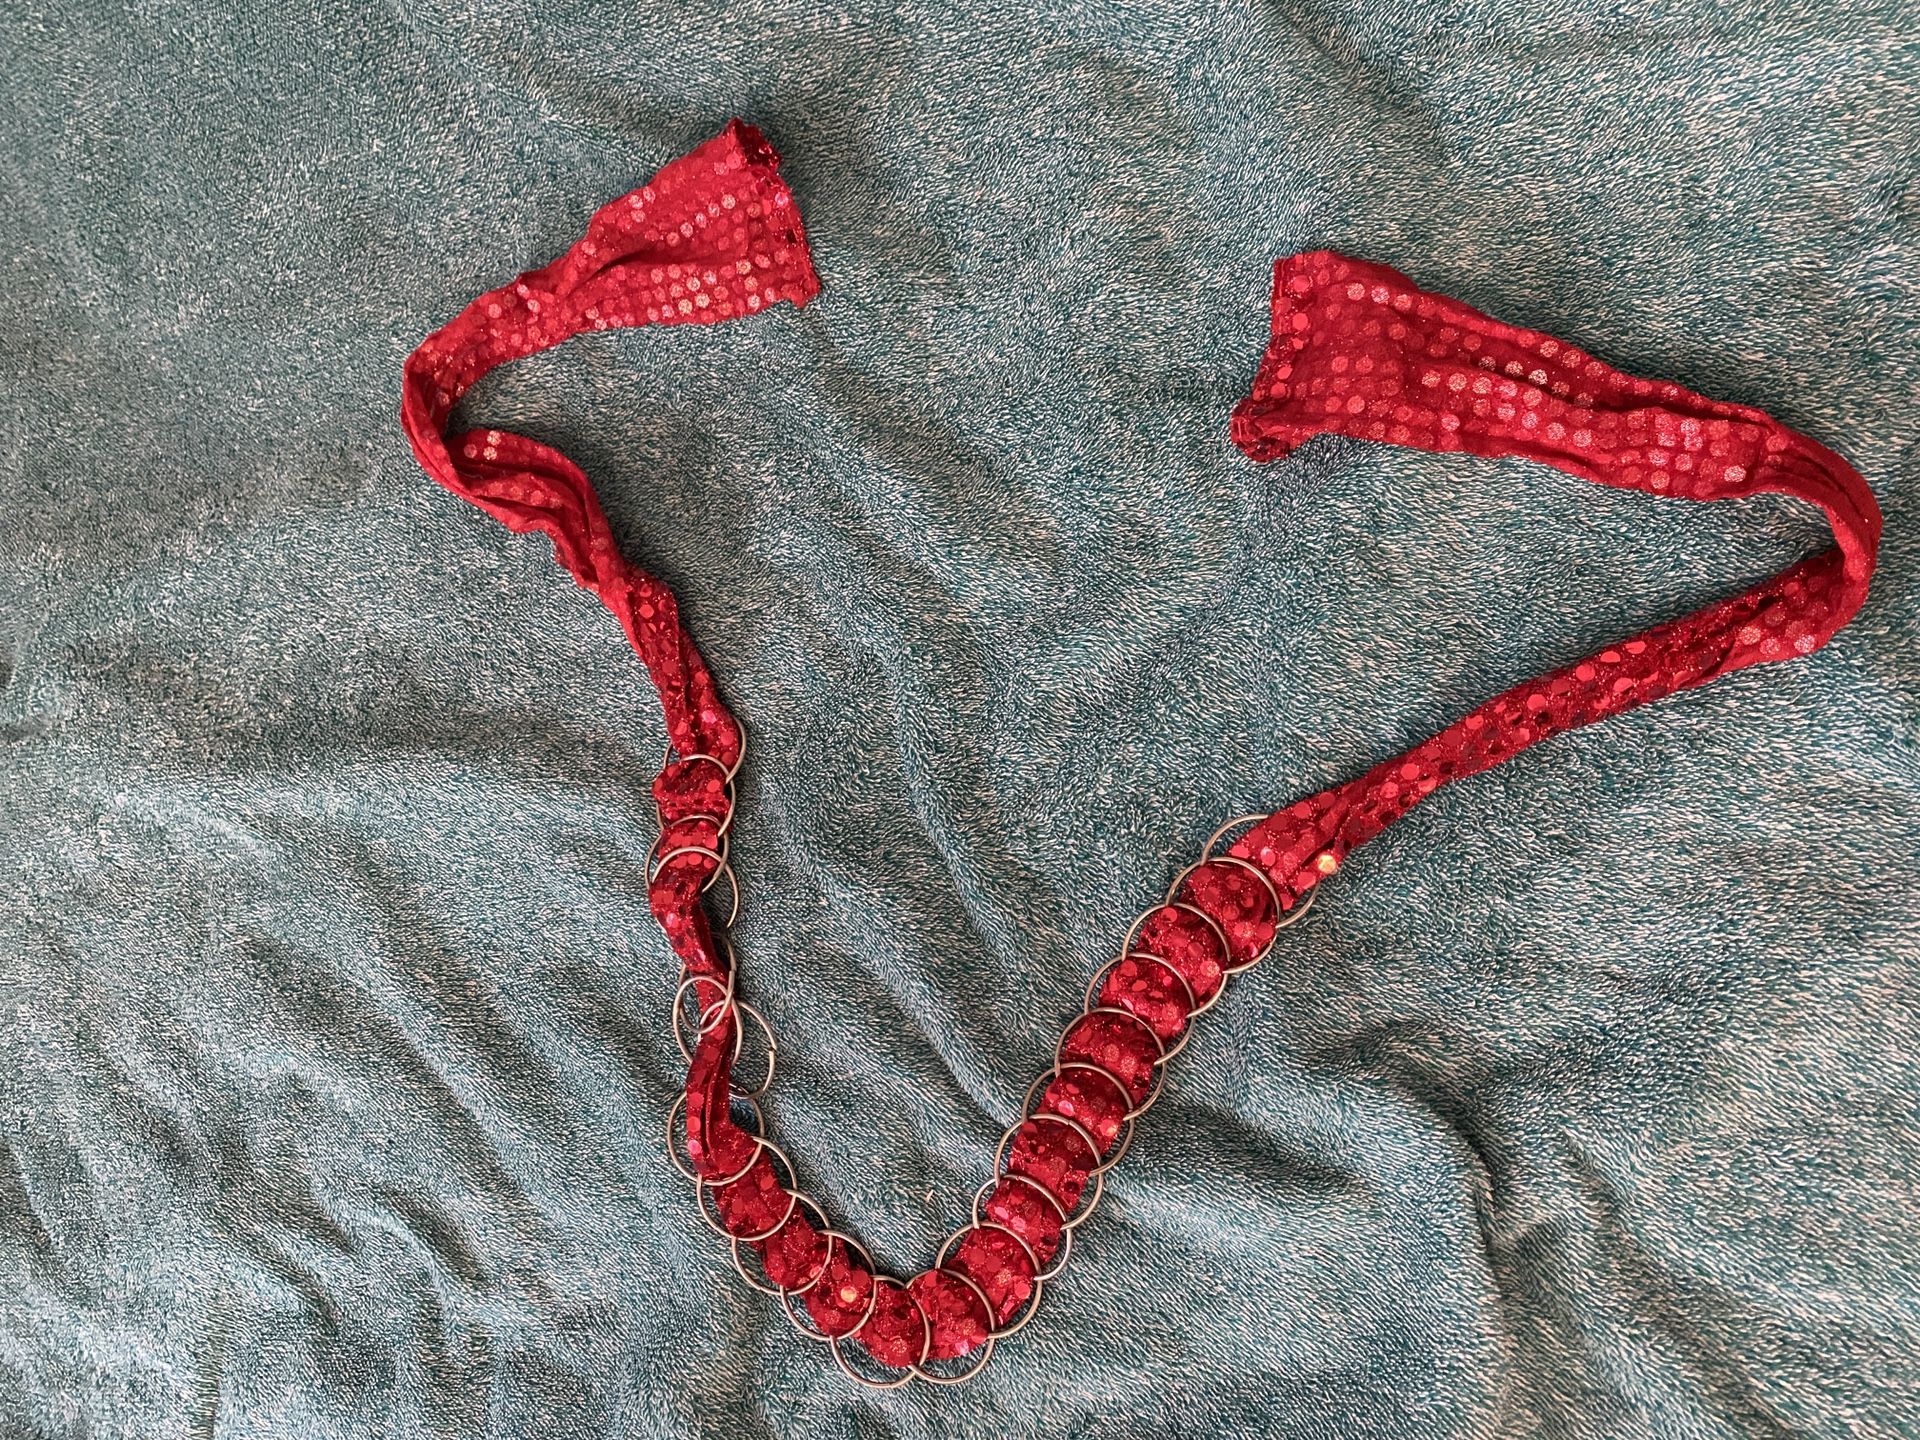 Red Shiny Scarf with Metal Rings (also in blue-green and white)